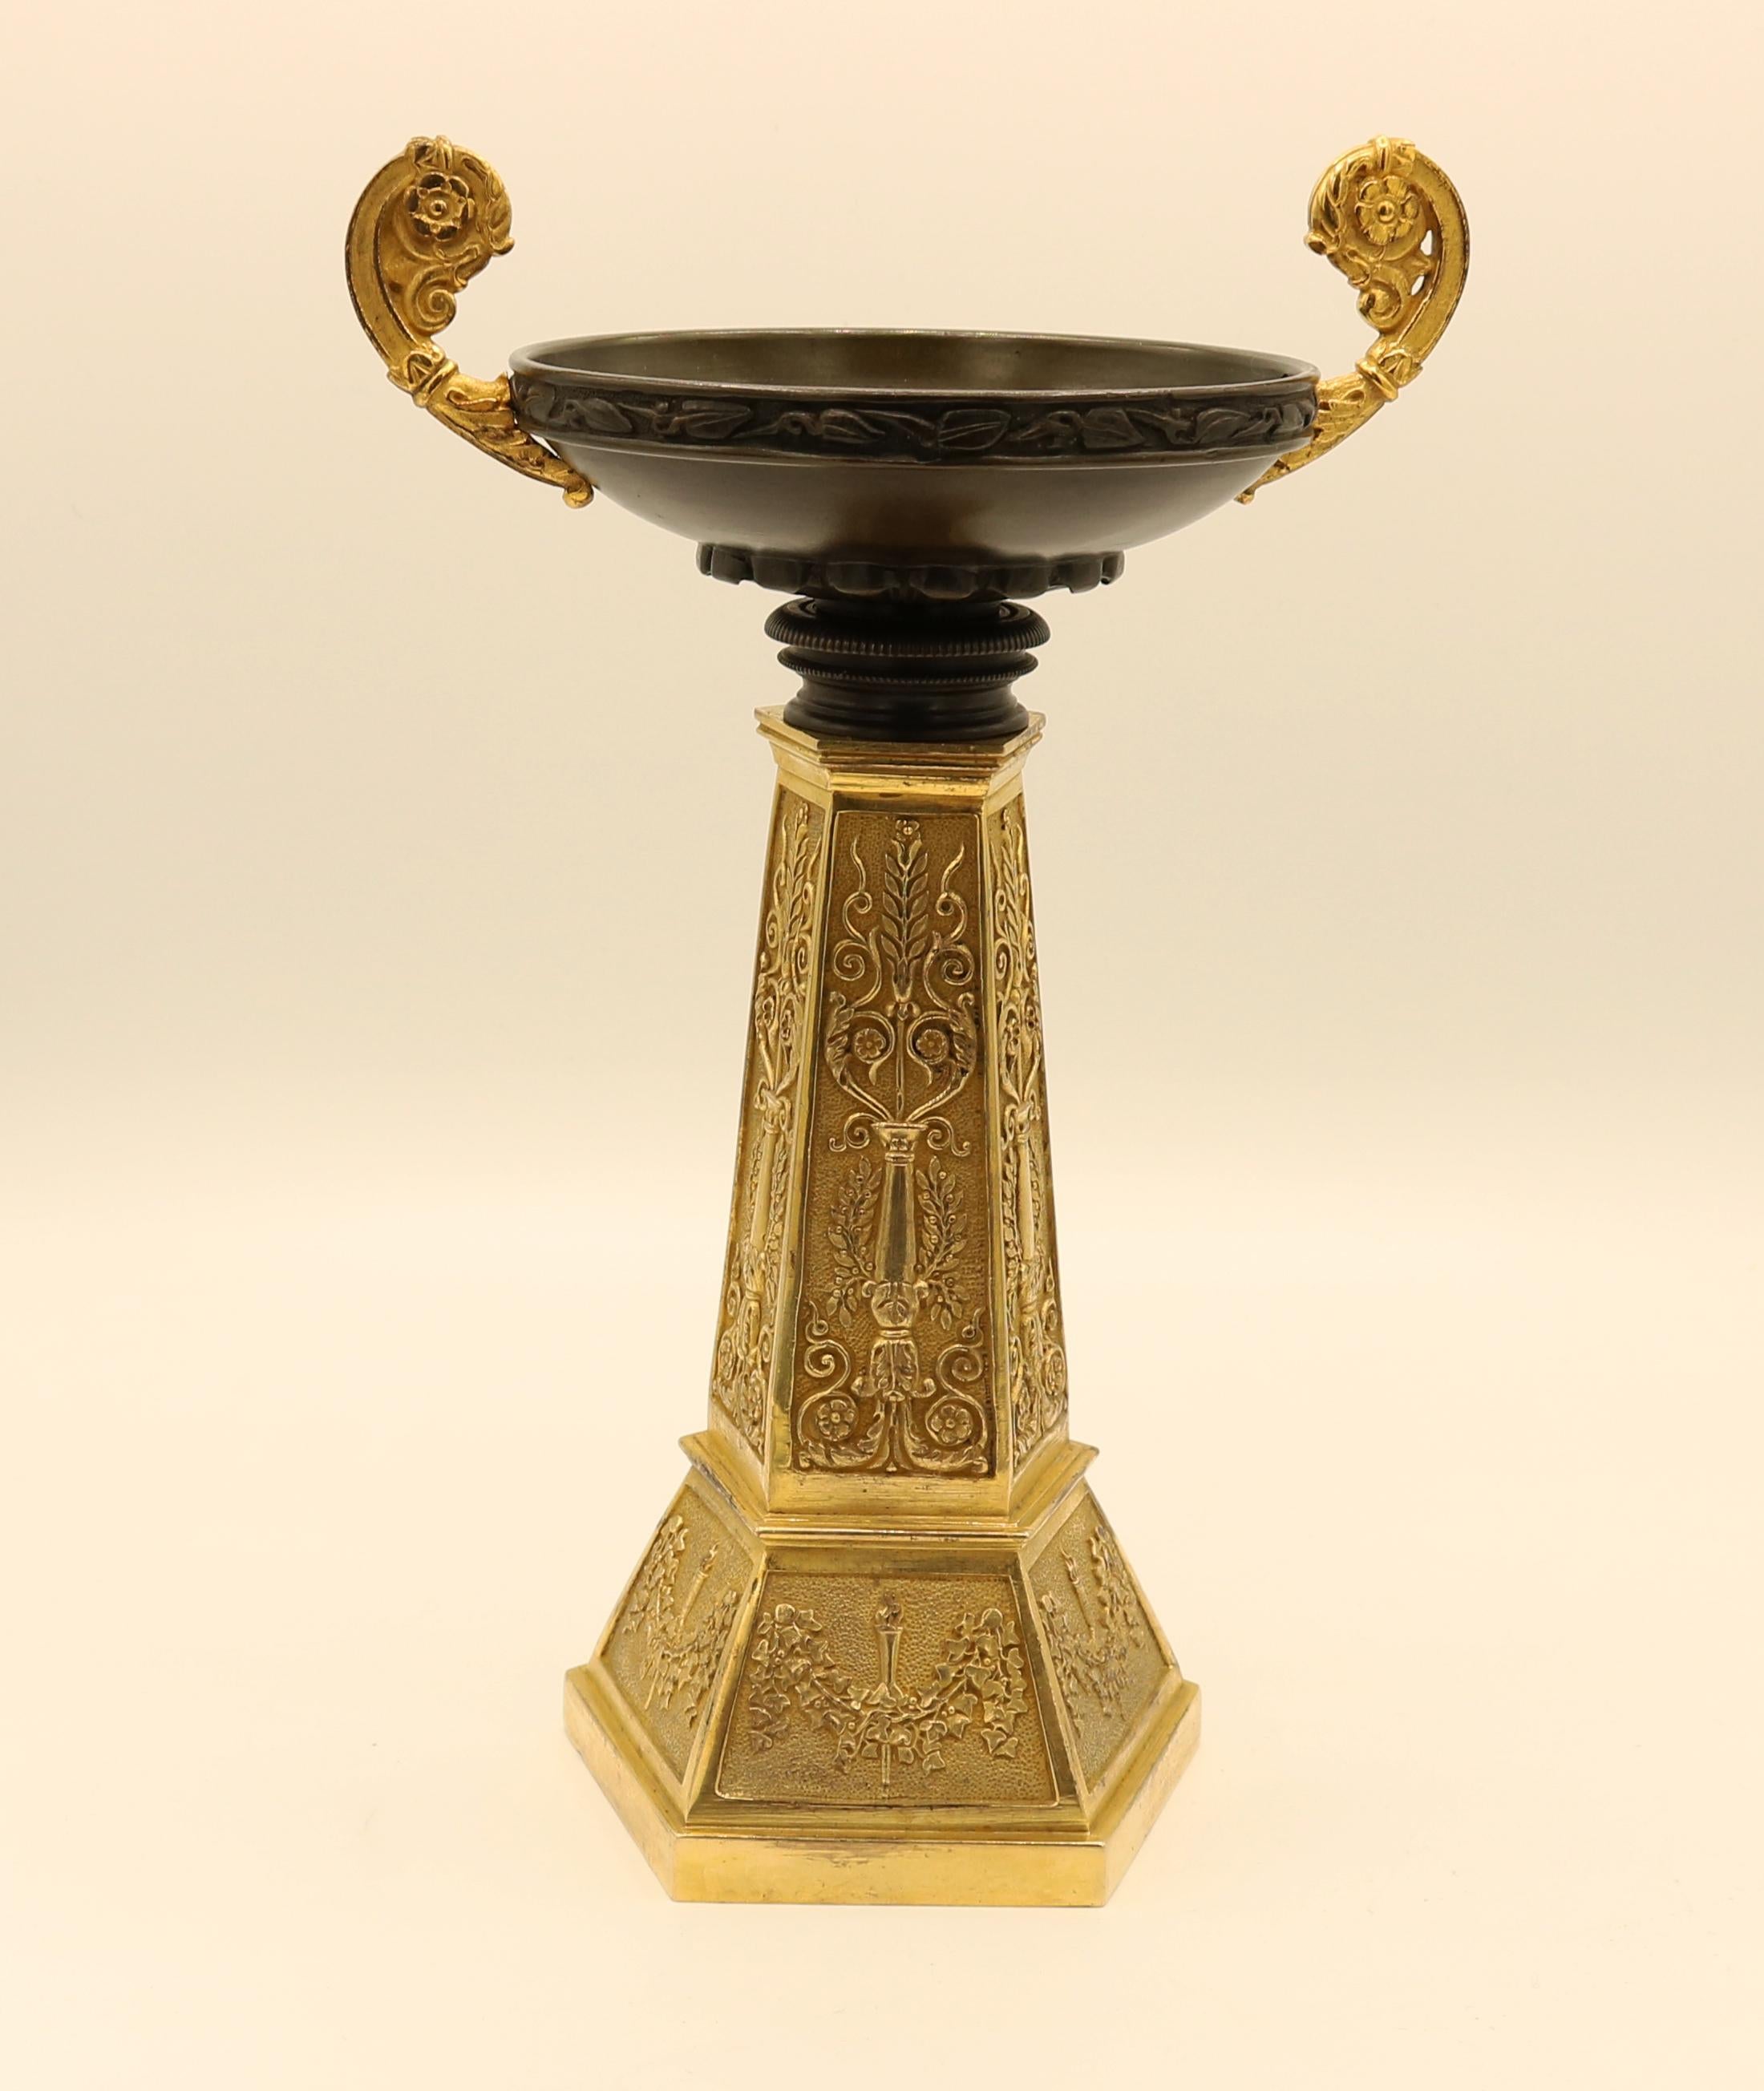 A pair of mid-19th century bronze and ormolu Tazzas of unusual design, the bowls having leaf and berry decorated edges with scroll handles above hexagonal panelled columns decorated with stylised candelabra supported on plinth bases with leaf